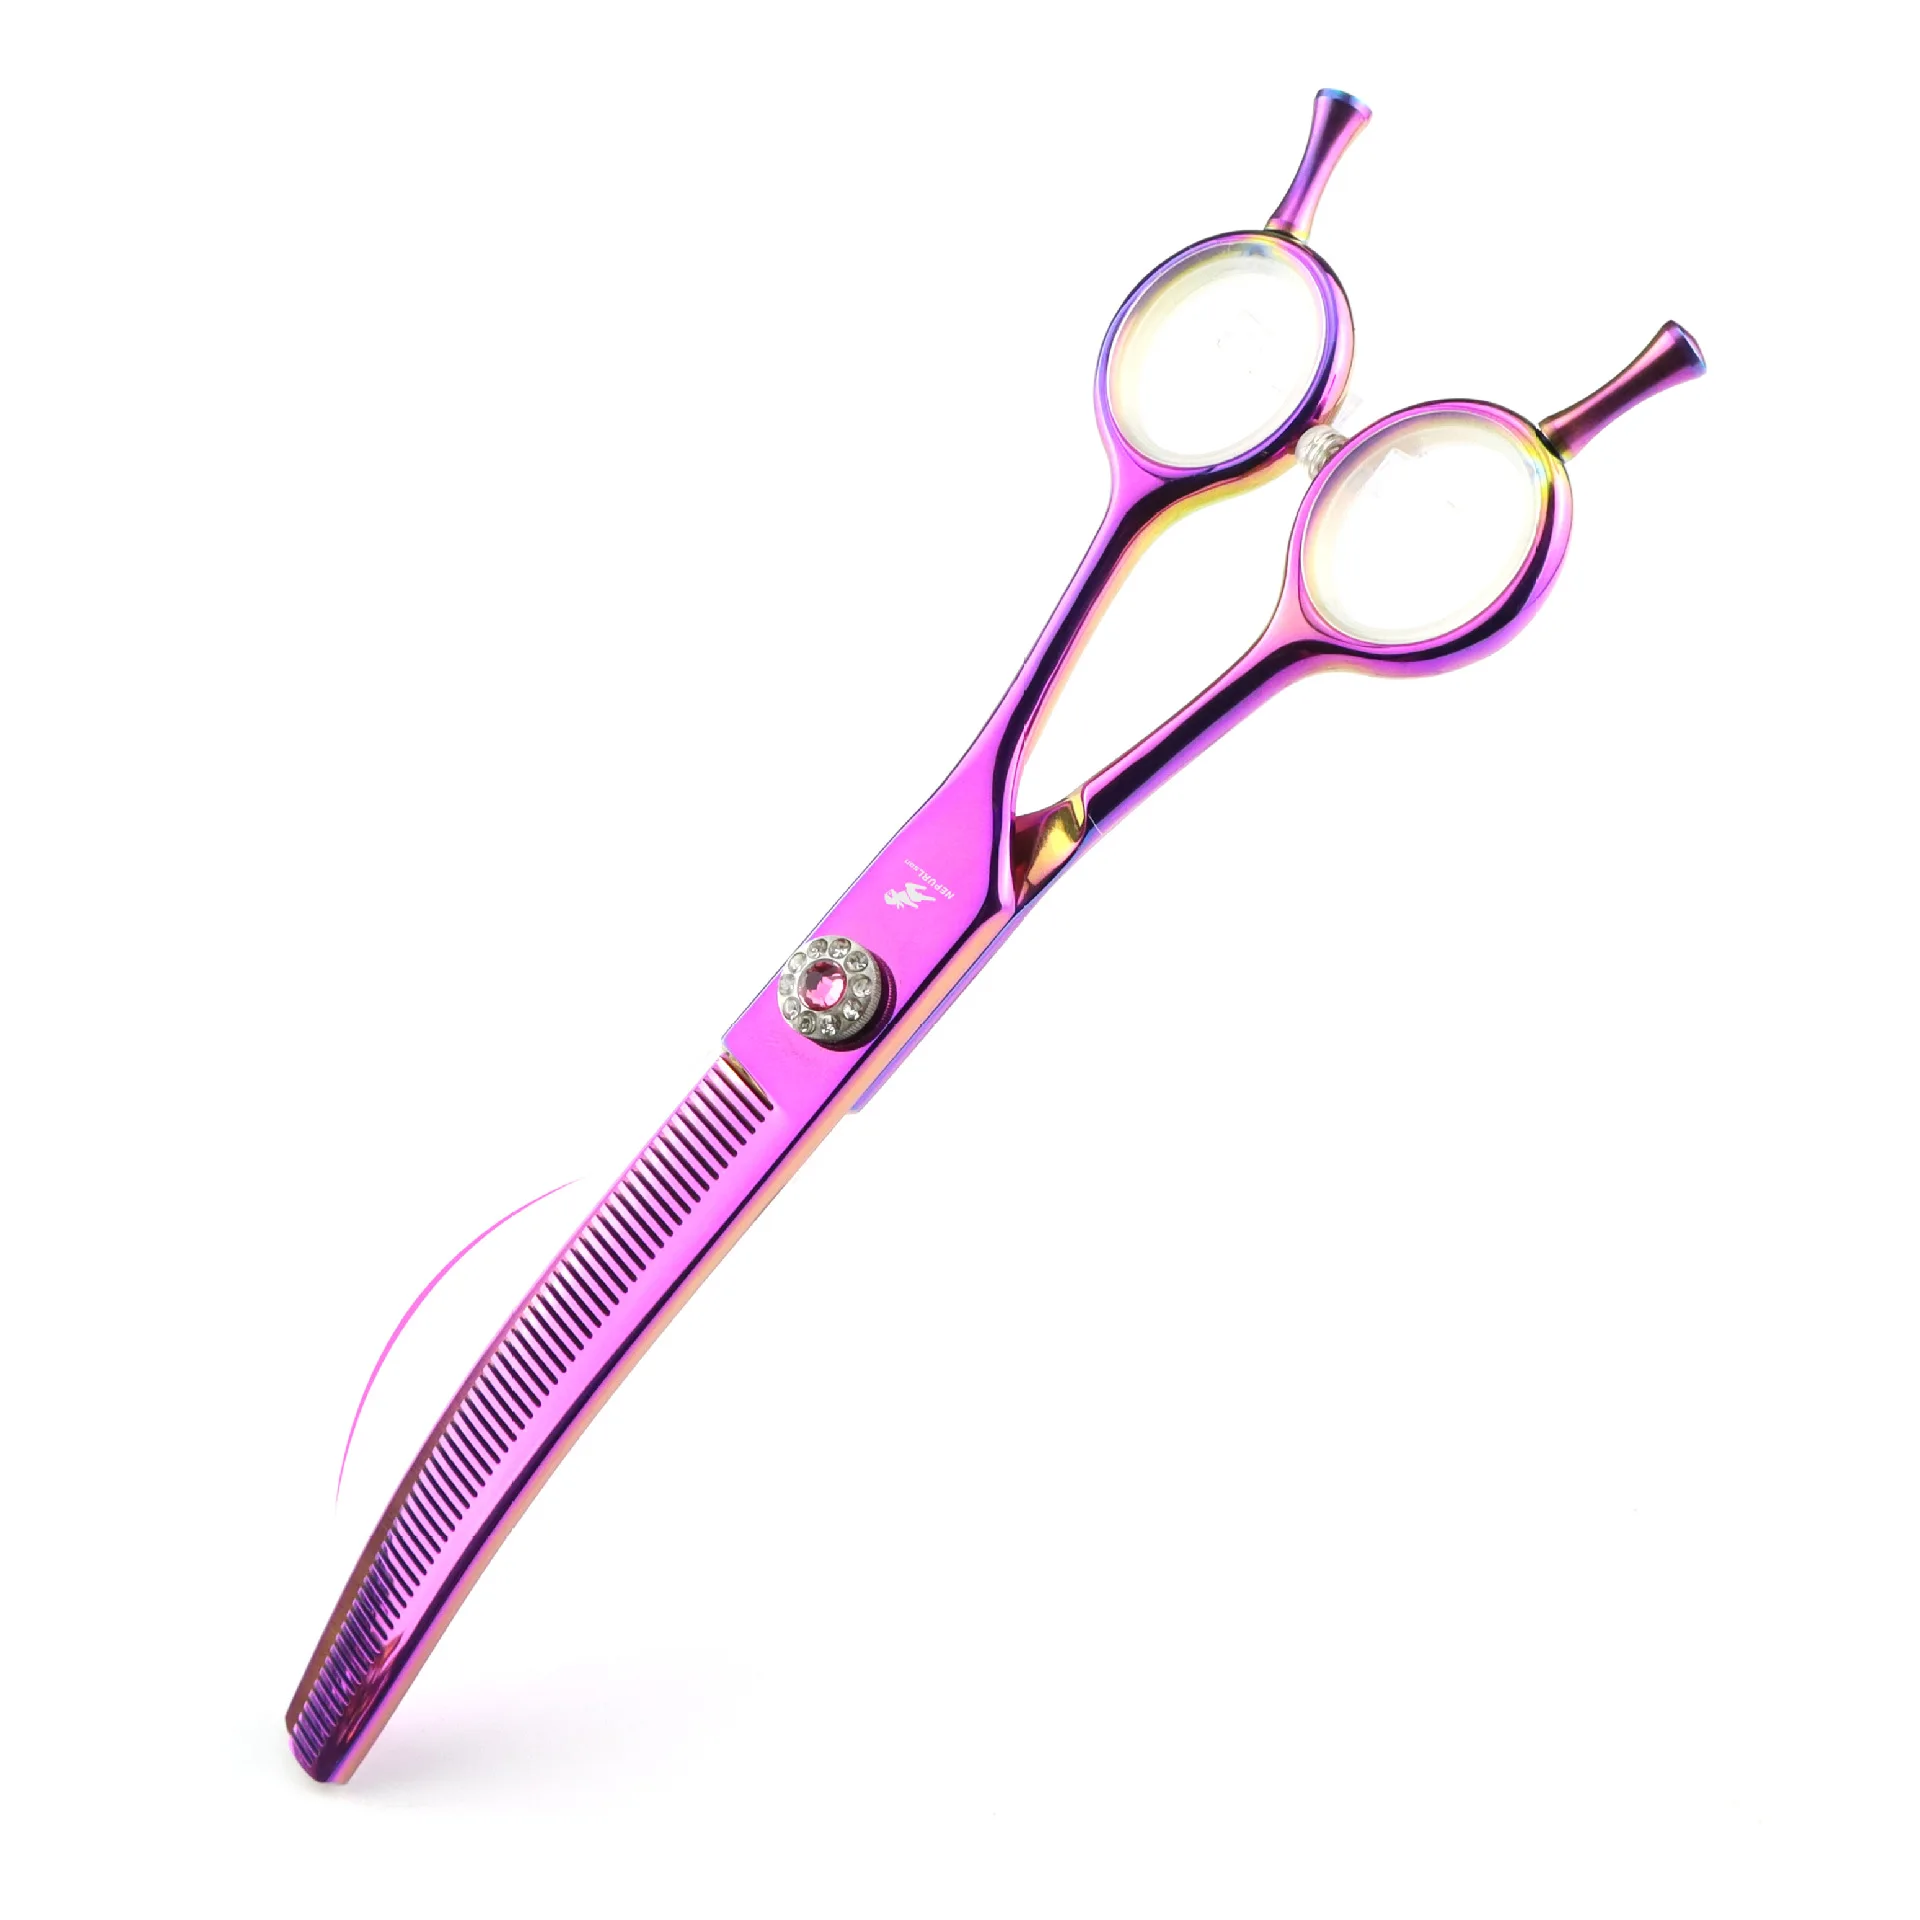 

7.0 inch Professional Curved Thinning Shear Curved Chunker Scissors JP440C Pets Dog Grooming Scissors Animal Haircut Tool